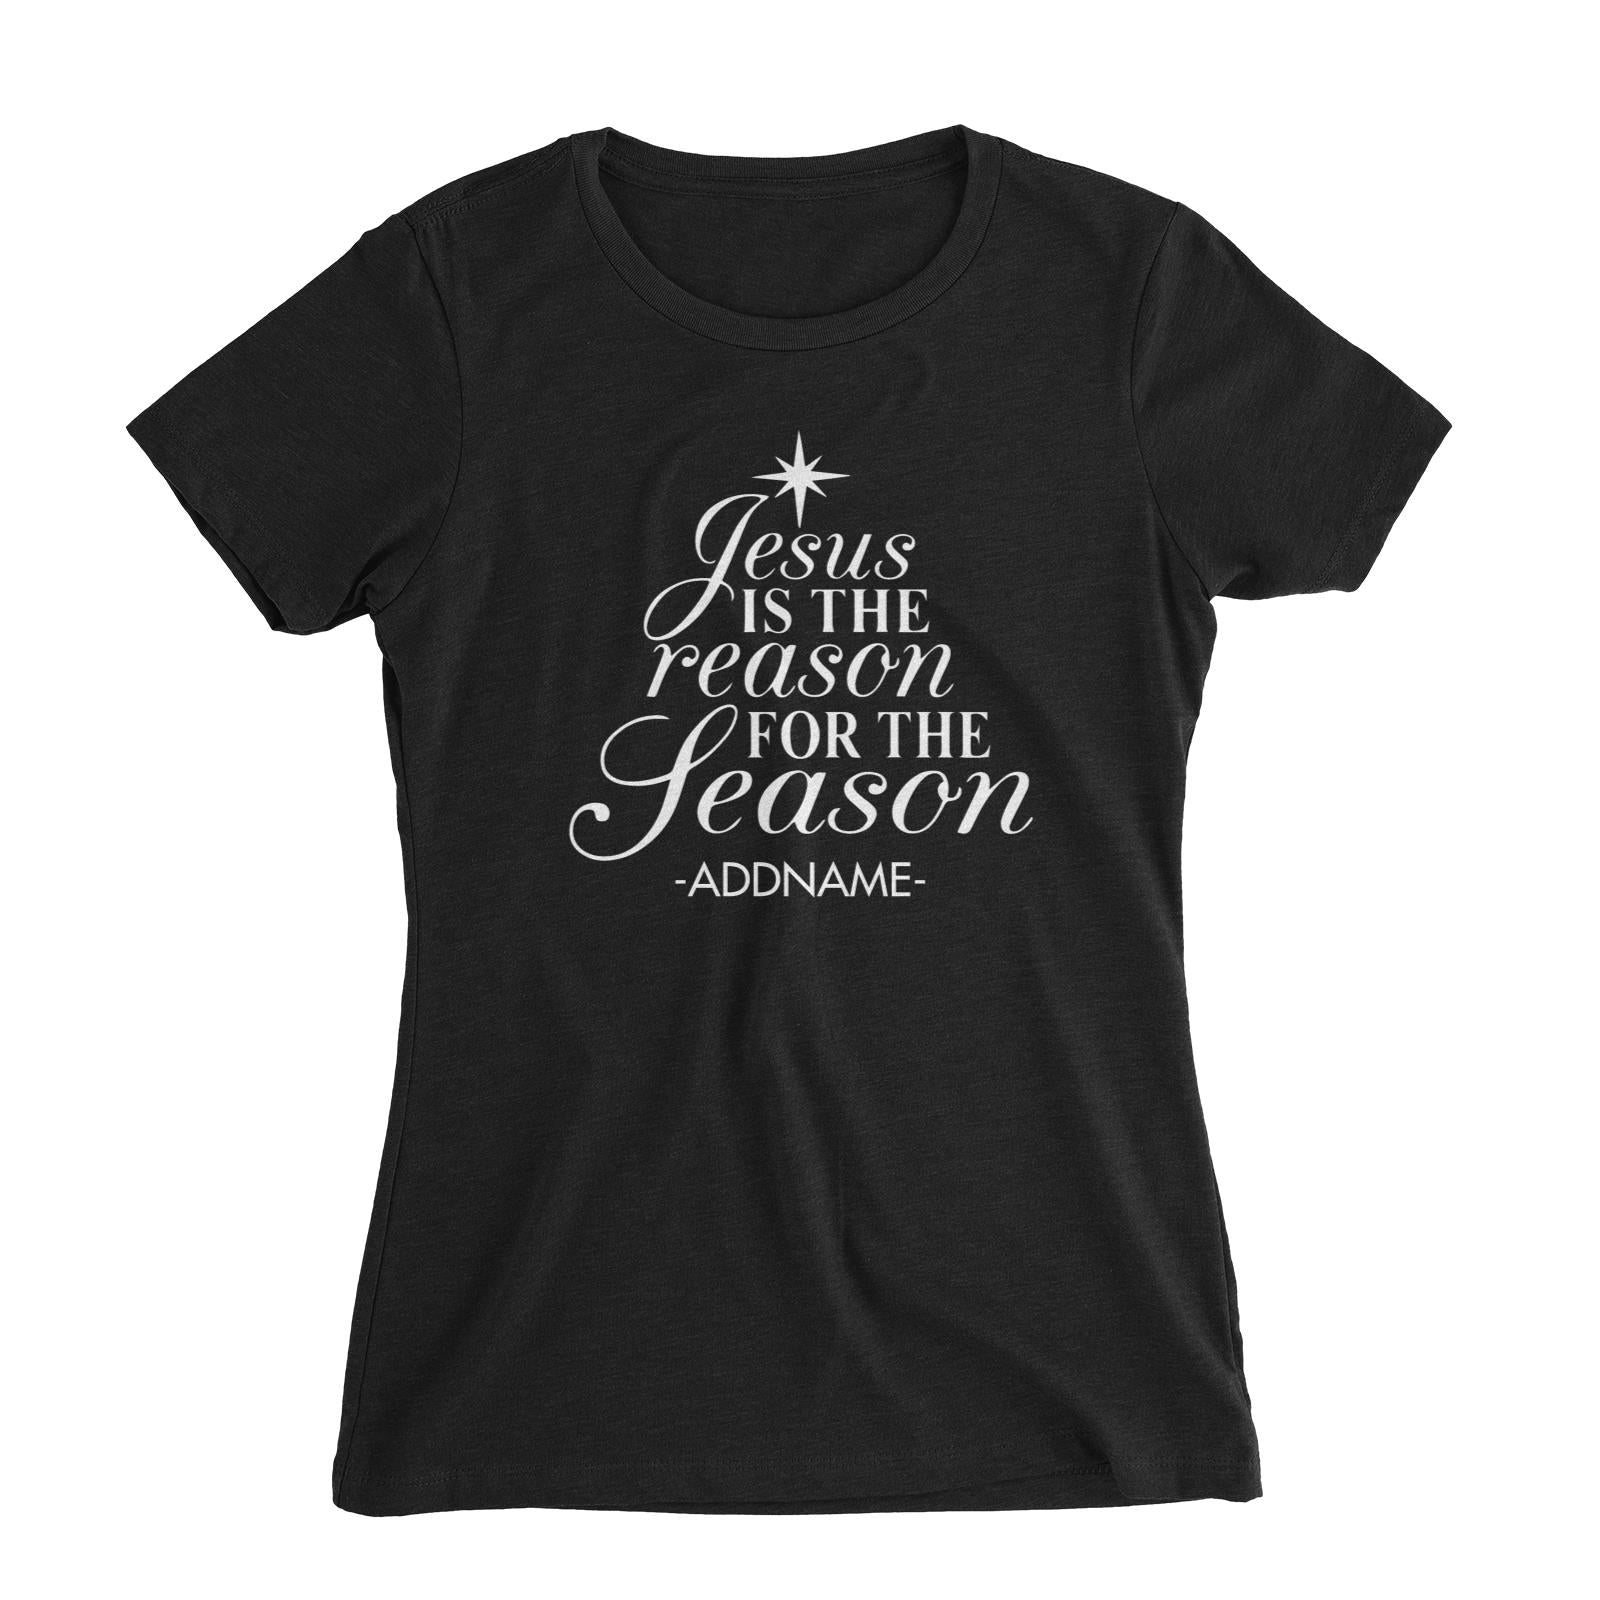 Jesus Is The Reason For The Season Addname Women's Slim Fit T-Shirt Christmas Personalizable Designs Lettering